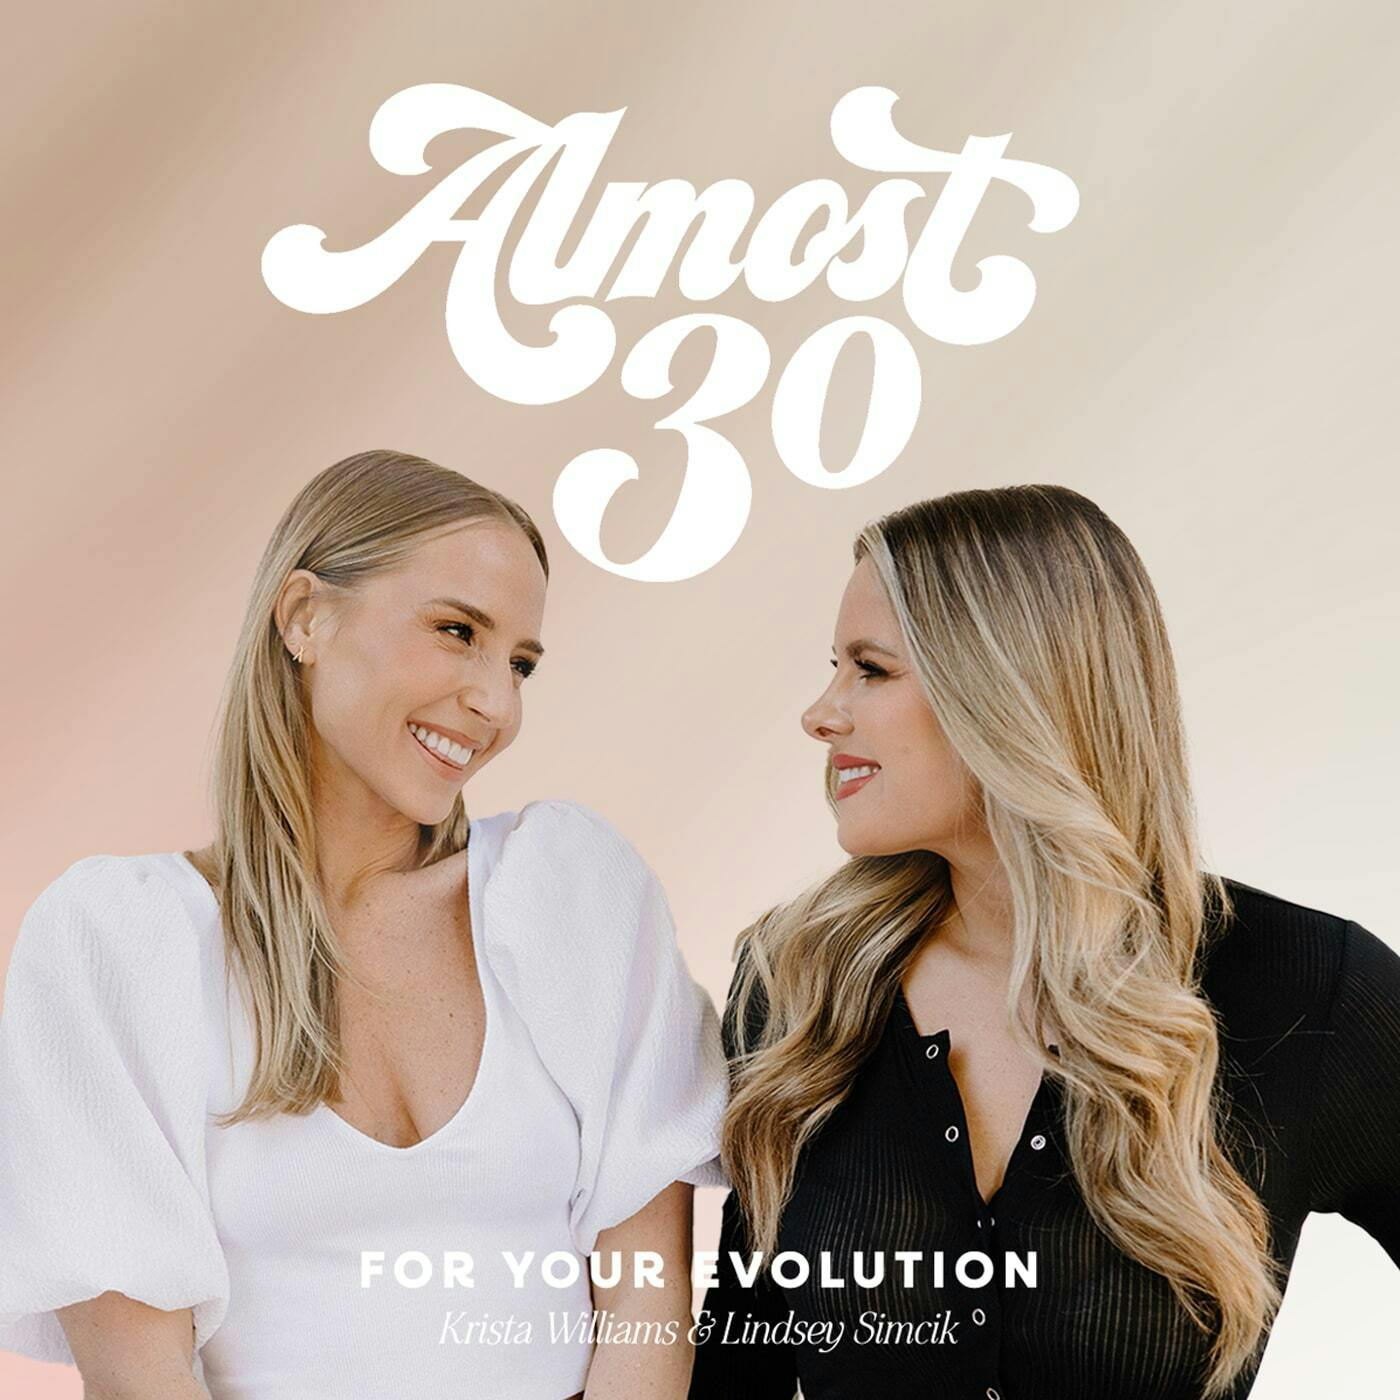 595. Imposter Syndrome, Narcissism + Adult Friendships with Mel Robbins